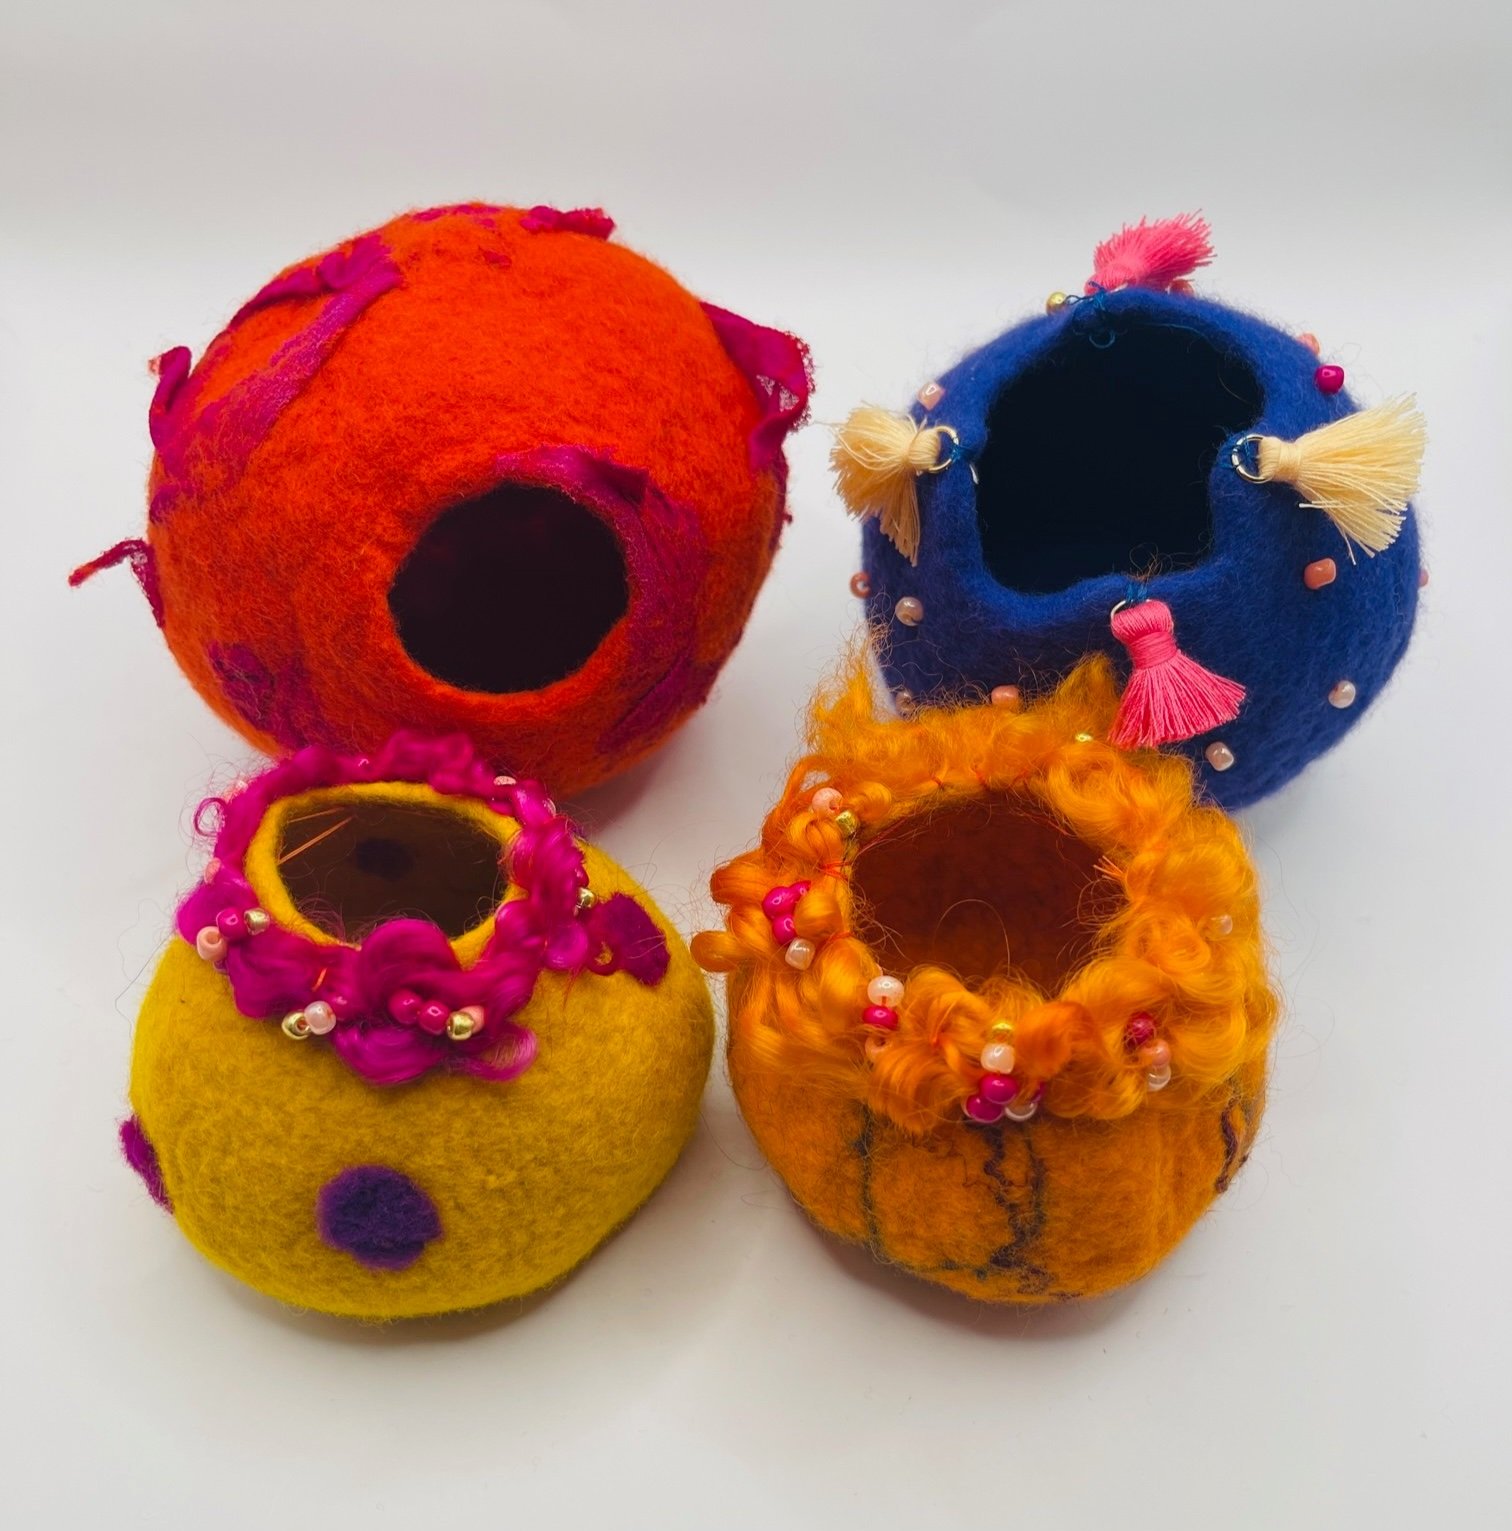 &lt;p&gt;&lt;strong&gt;CINDY KENNELLY&lt;/strong&gt;felted wool vessels&lt;a href="/cindy-kennelly-ill2023"&gt;More →&lt;/a&gt;&lt;/p&gt;